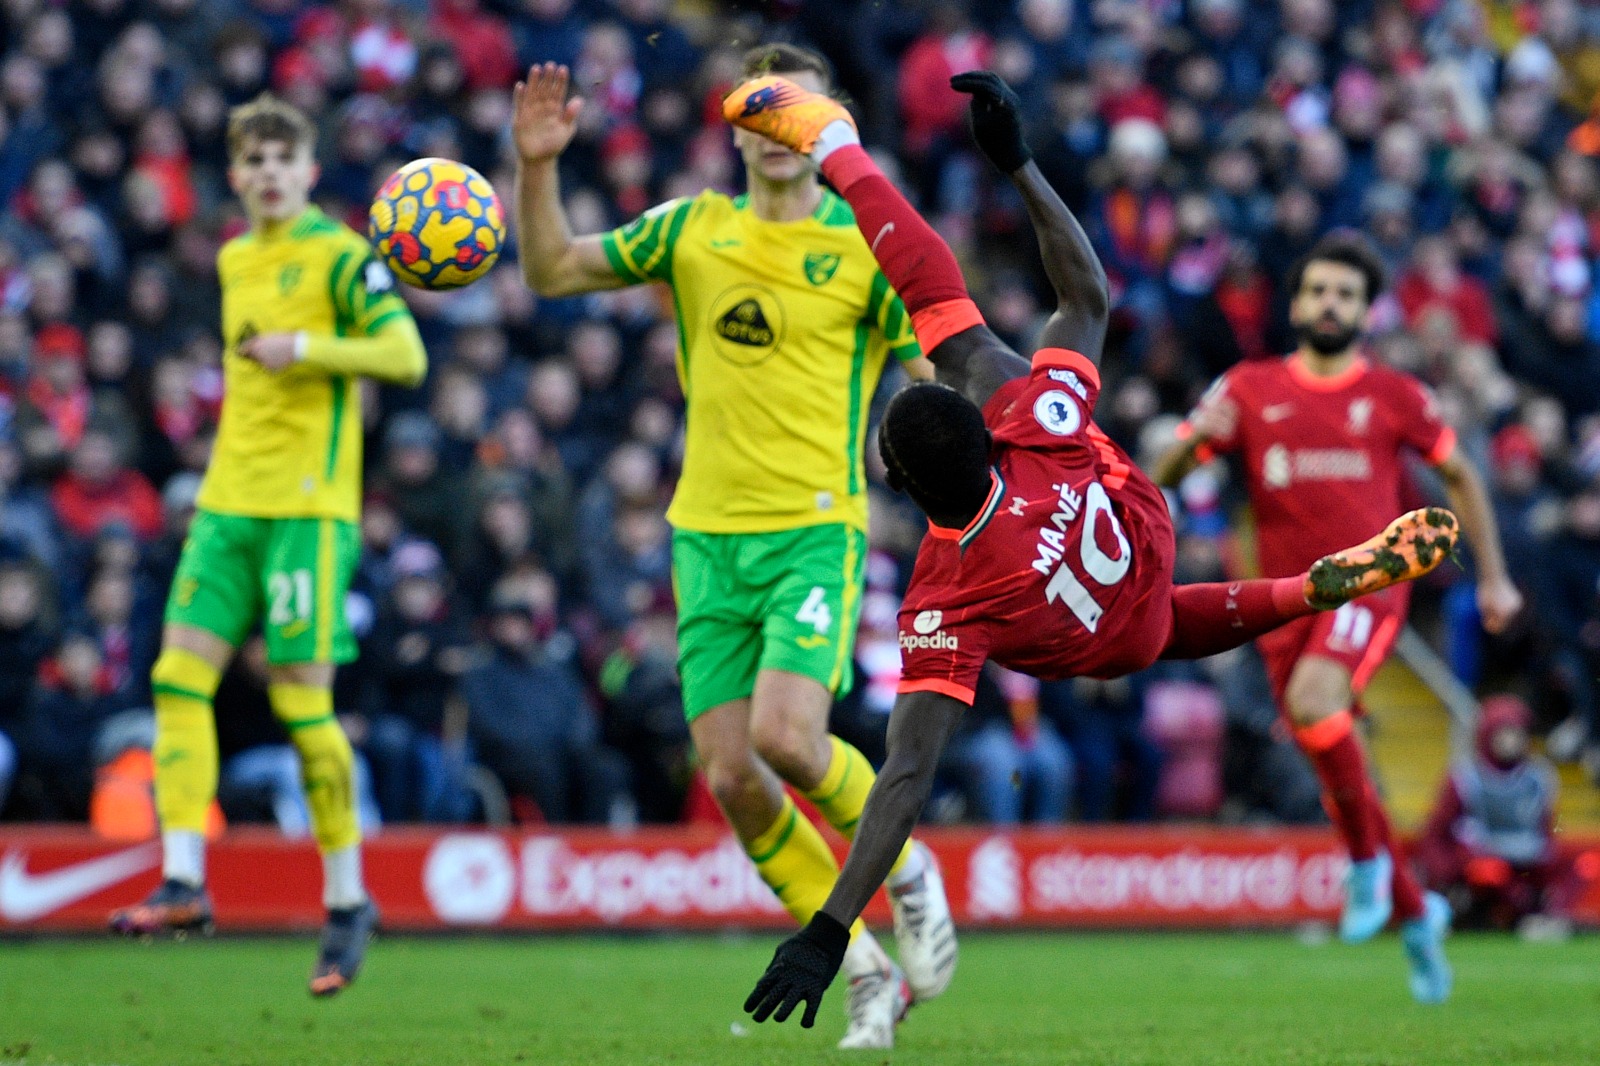 LIVERPOOL: Liverpool's Senegalese striker Sadio Mane scores their first goal with this acrobatic shot during the English Premier League football match between Liverpool and Norwich City yesterday.- AFP